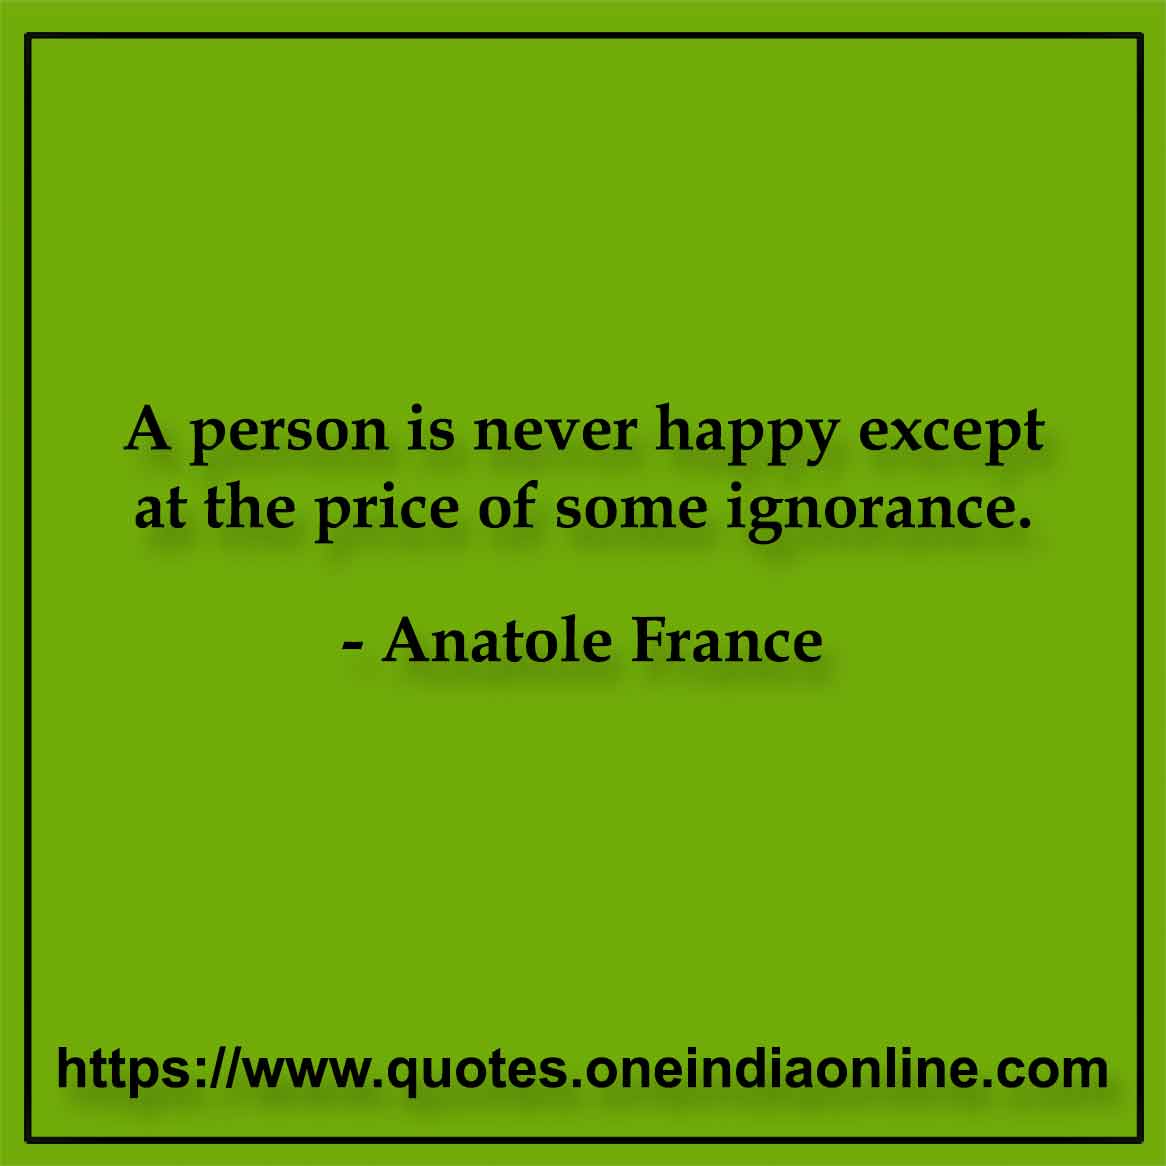 A person is never happy except at the price of some ignorance. Anatole France